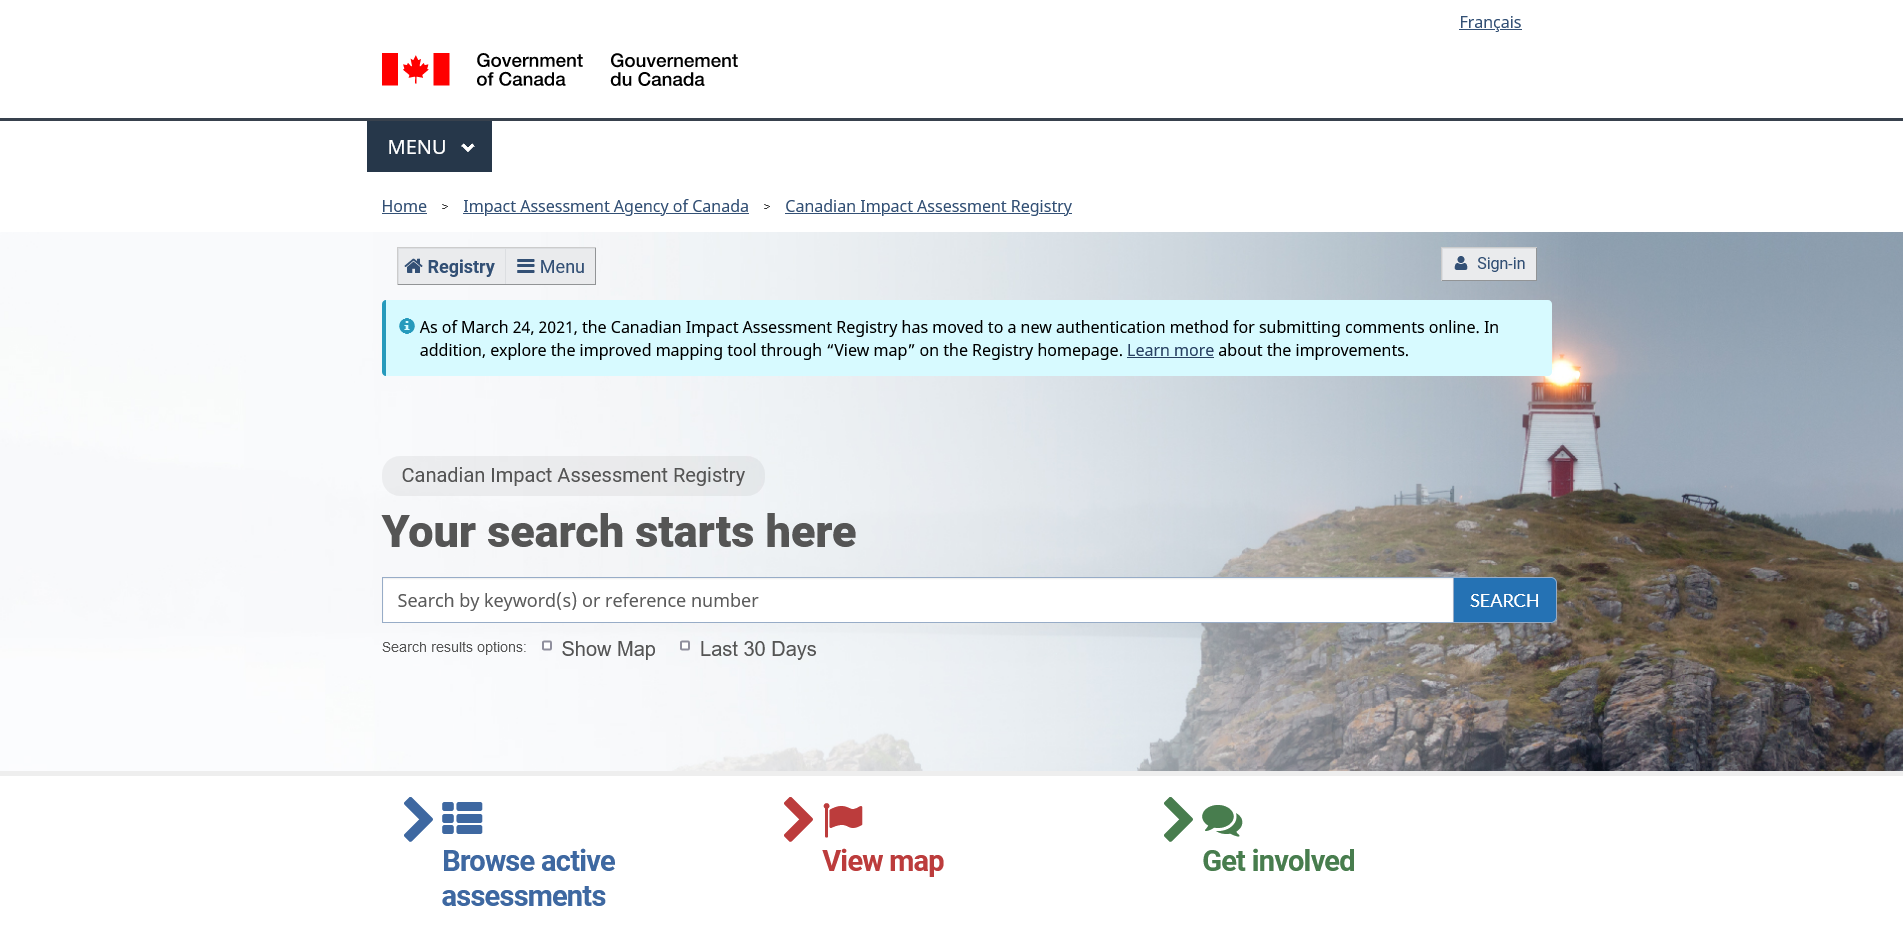 A screen capture of the Registry home page. At the bottom from left to right are the buttons, which read “Search active assessments”, “View map”, and “Get involved”.